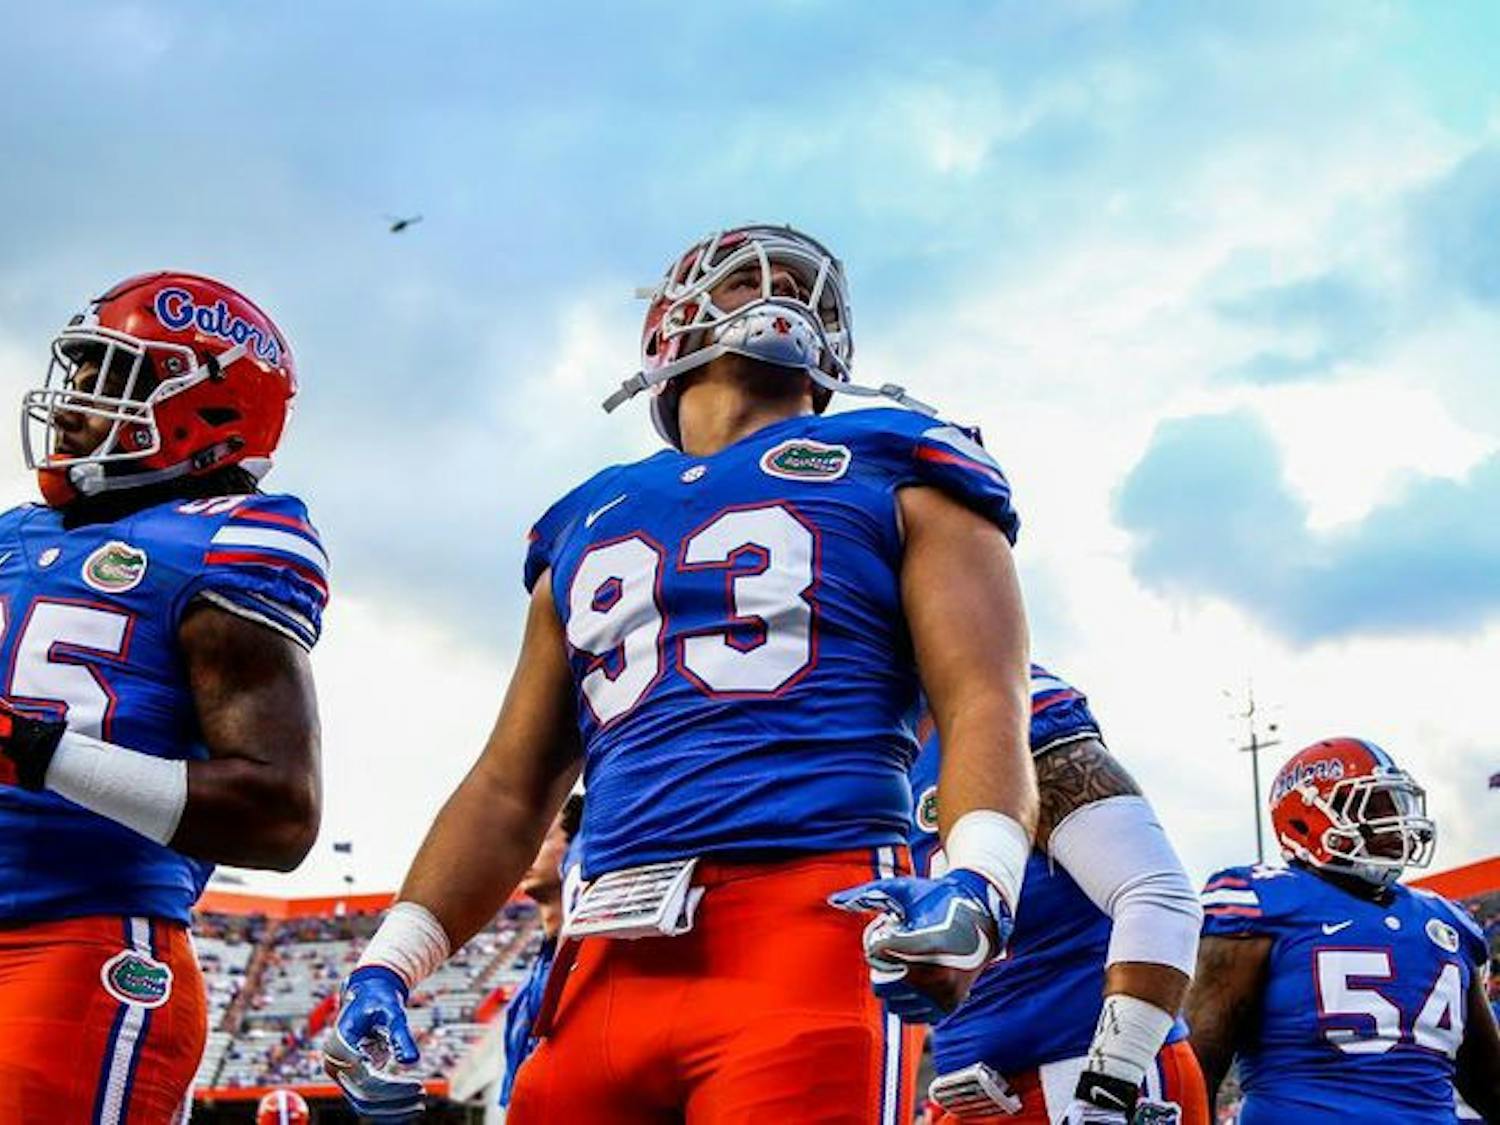 The Gators football team faces the possibility of ending the season with a losing record for just the second time in 38 years.